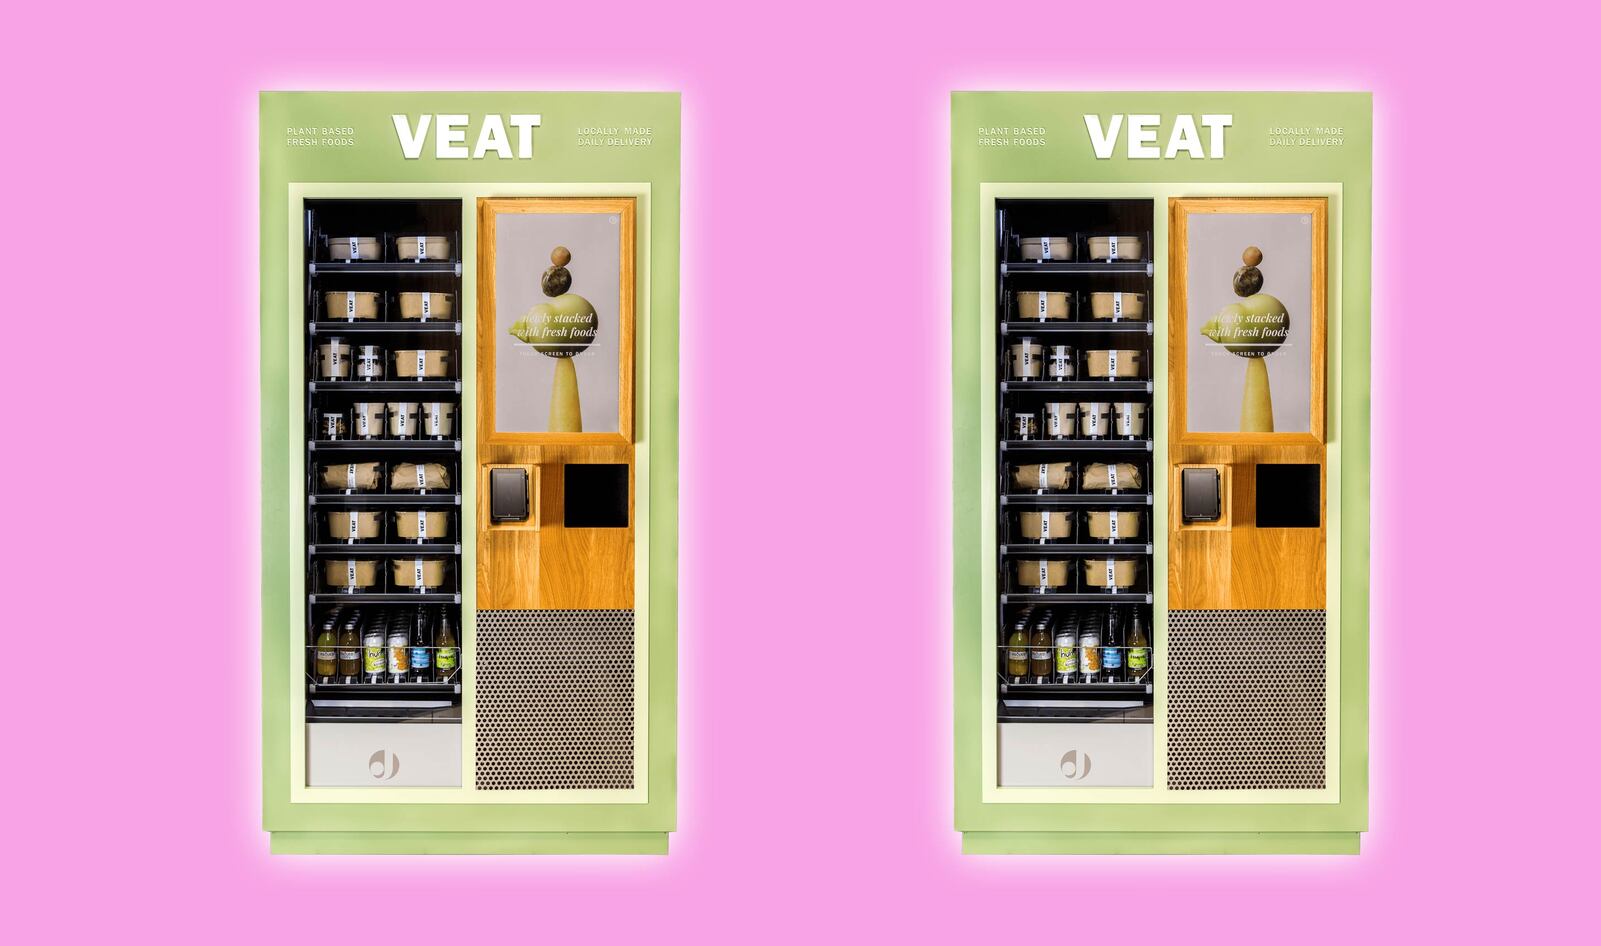 Vegan Vending Machines Are Coming To Sweden